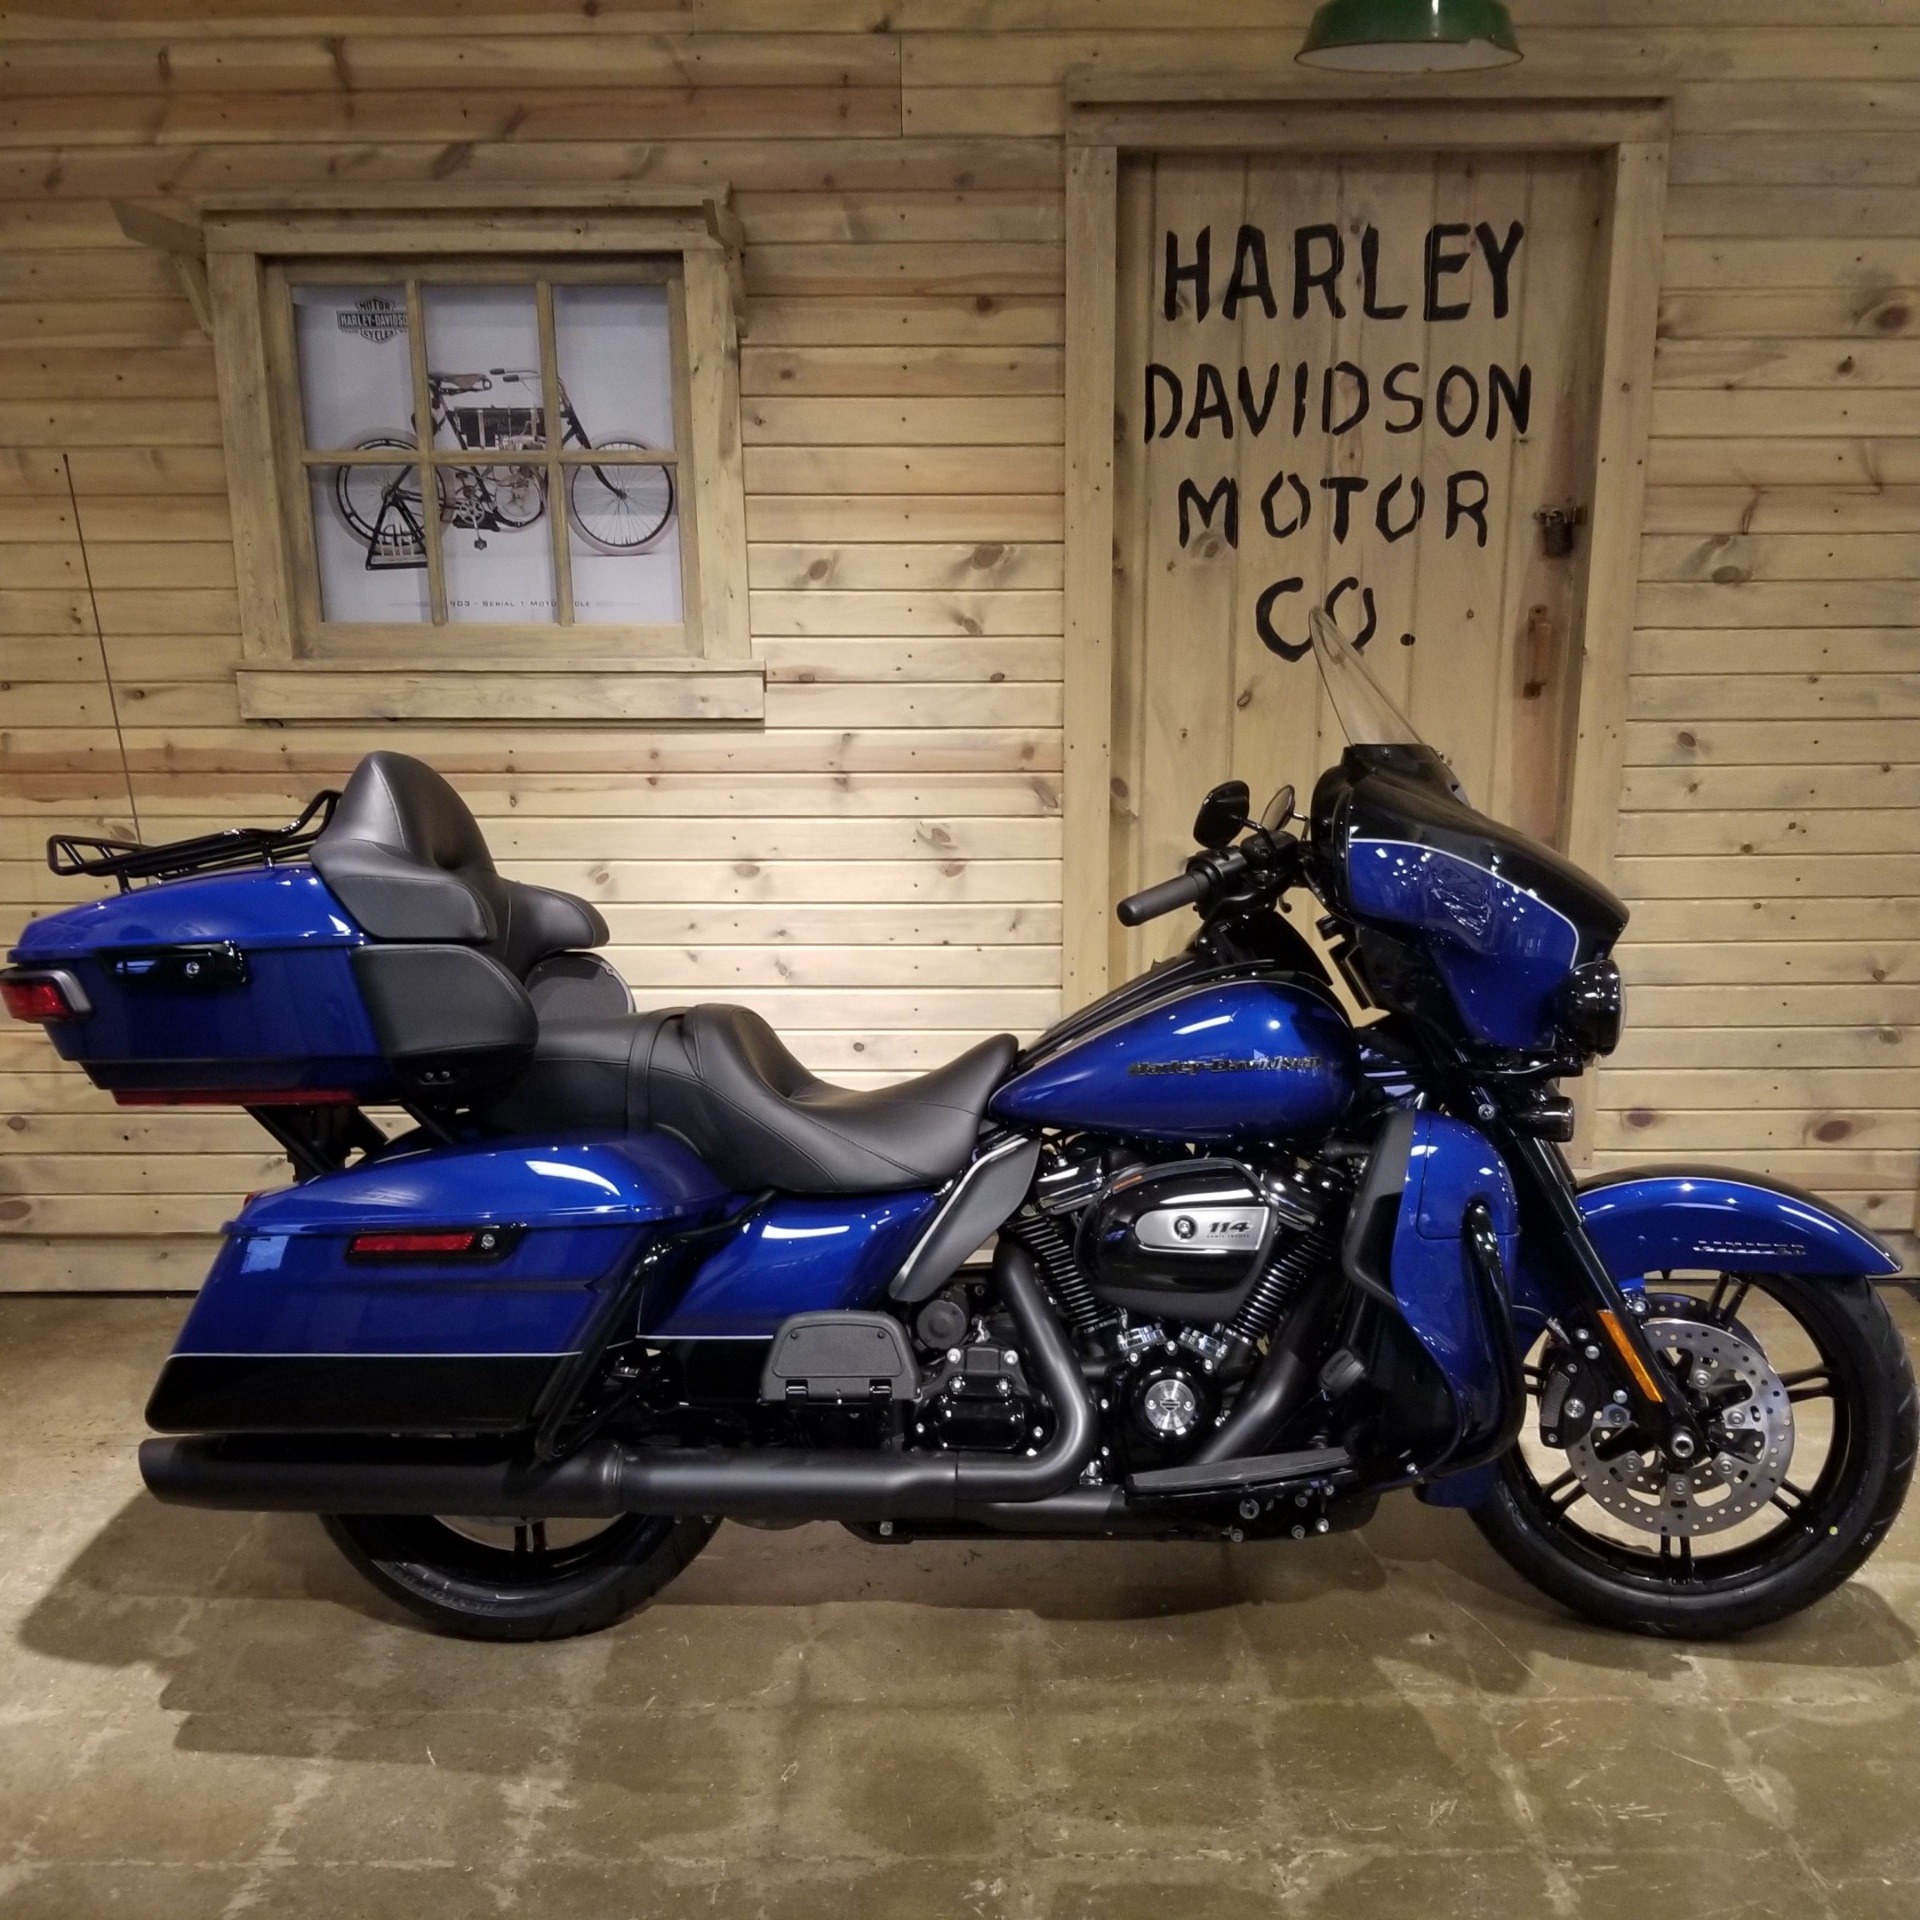 2022 Harley-Davidson Ultra Limited in Mentor, Ohio - Photo 1